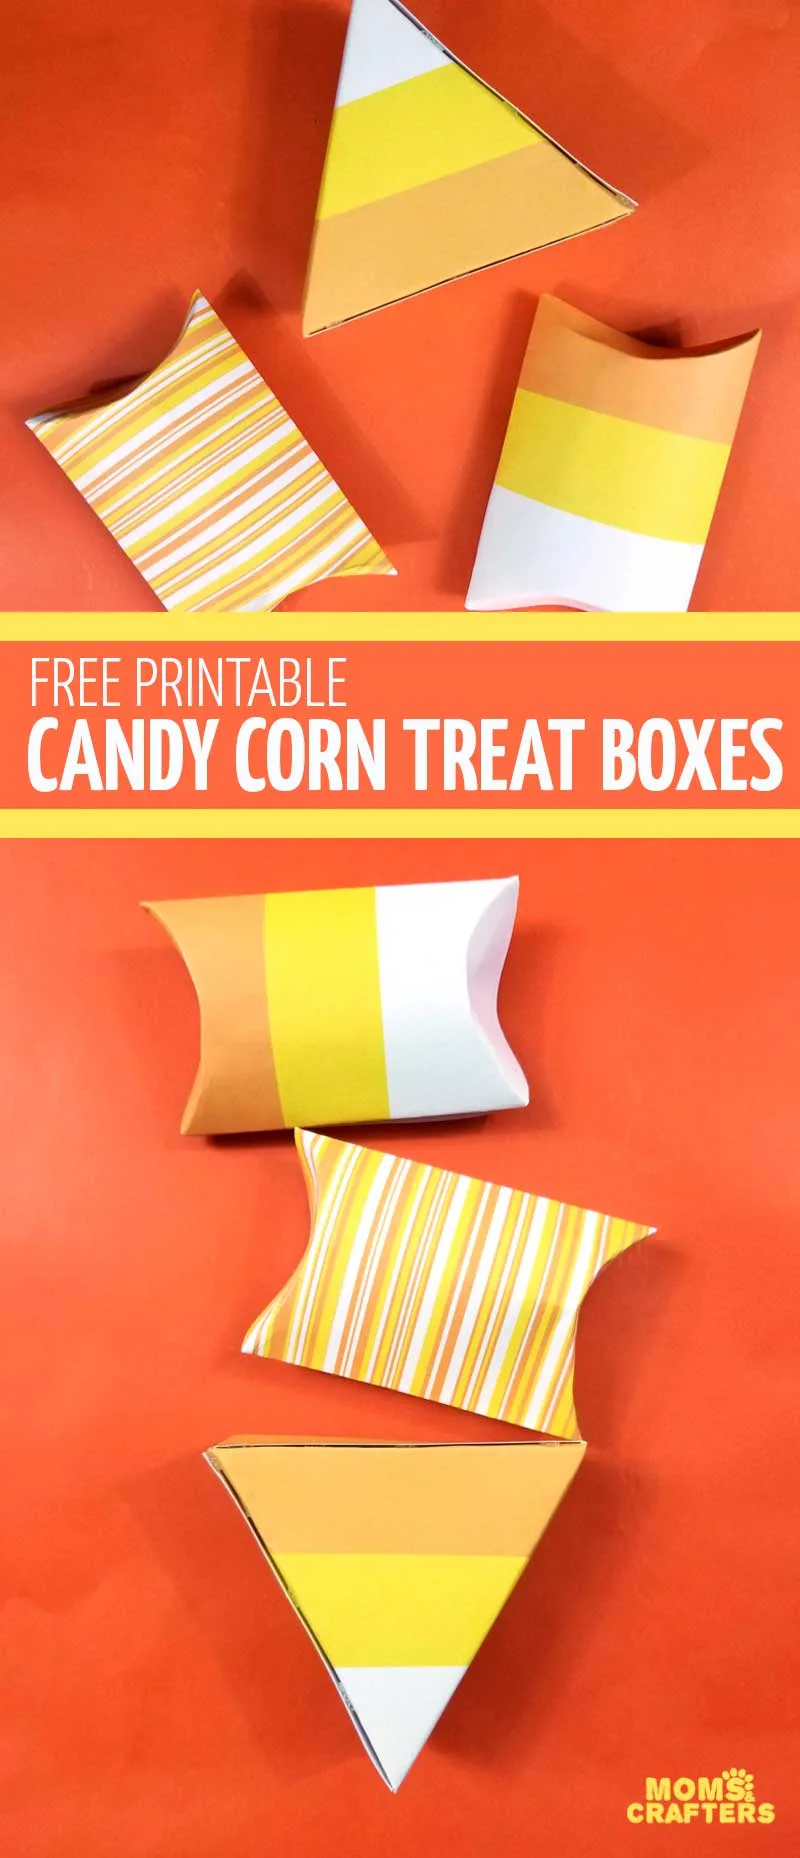 Grab these free printable Halloween treat boxes in candy corn patterns! This adorable autumn and Halloween paper craft is fun for kids and grown ups to fill with trick or treat favors or small gifts for teal pumpkin prizes.